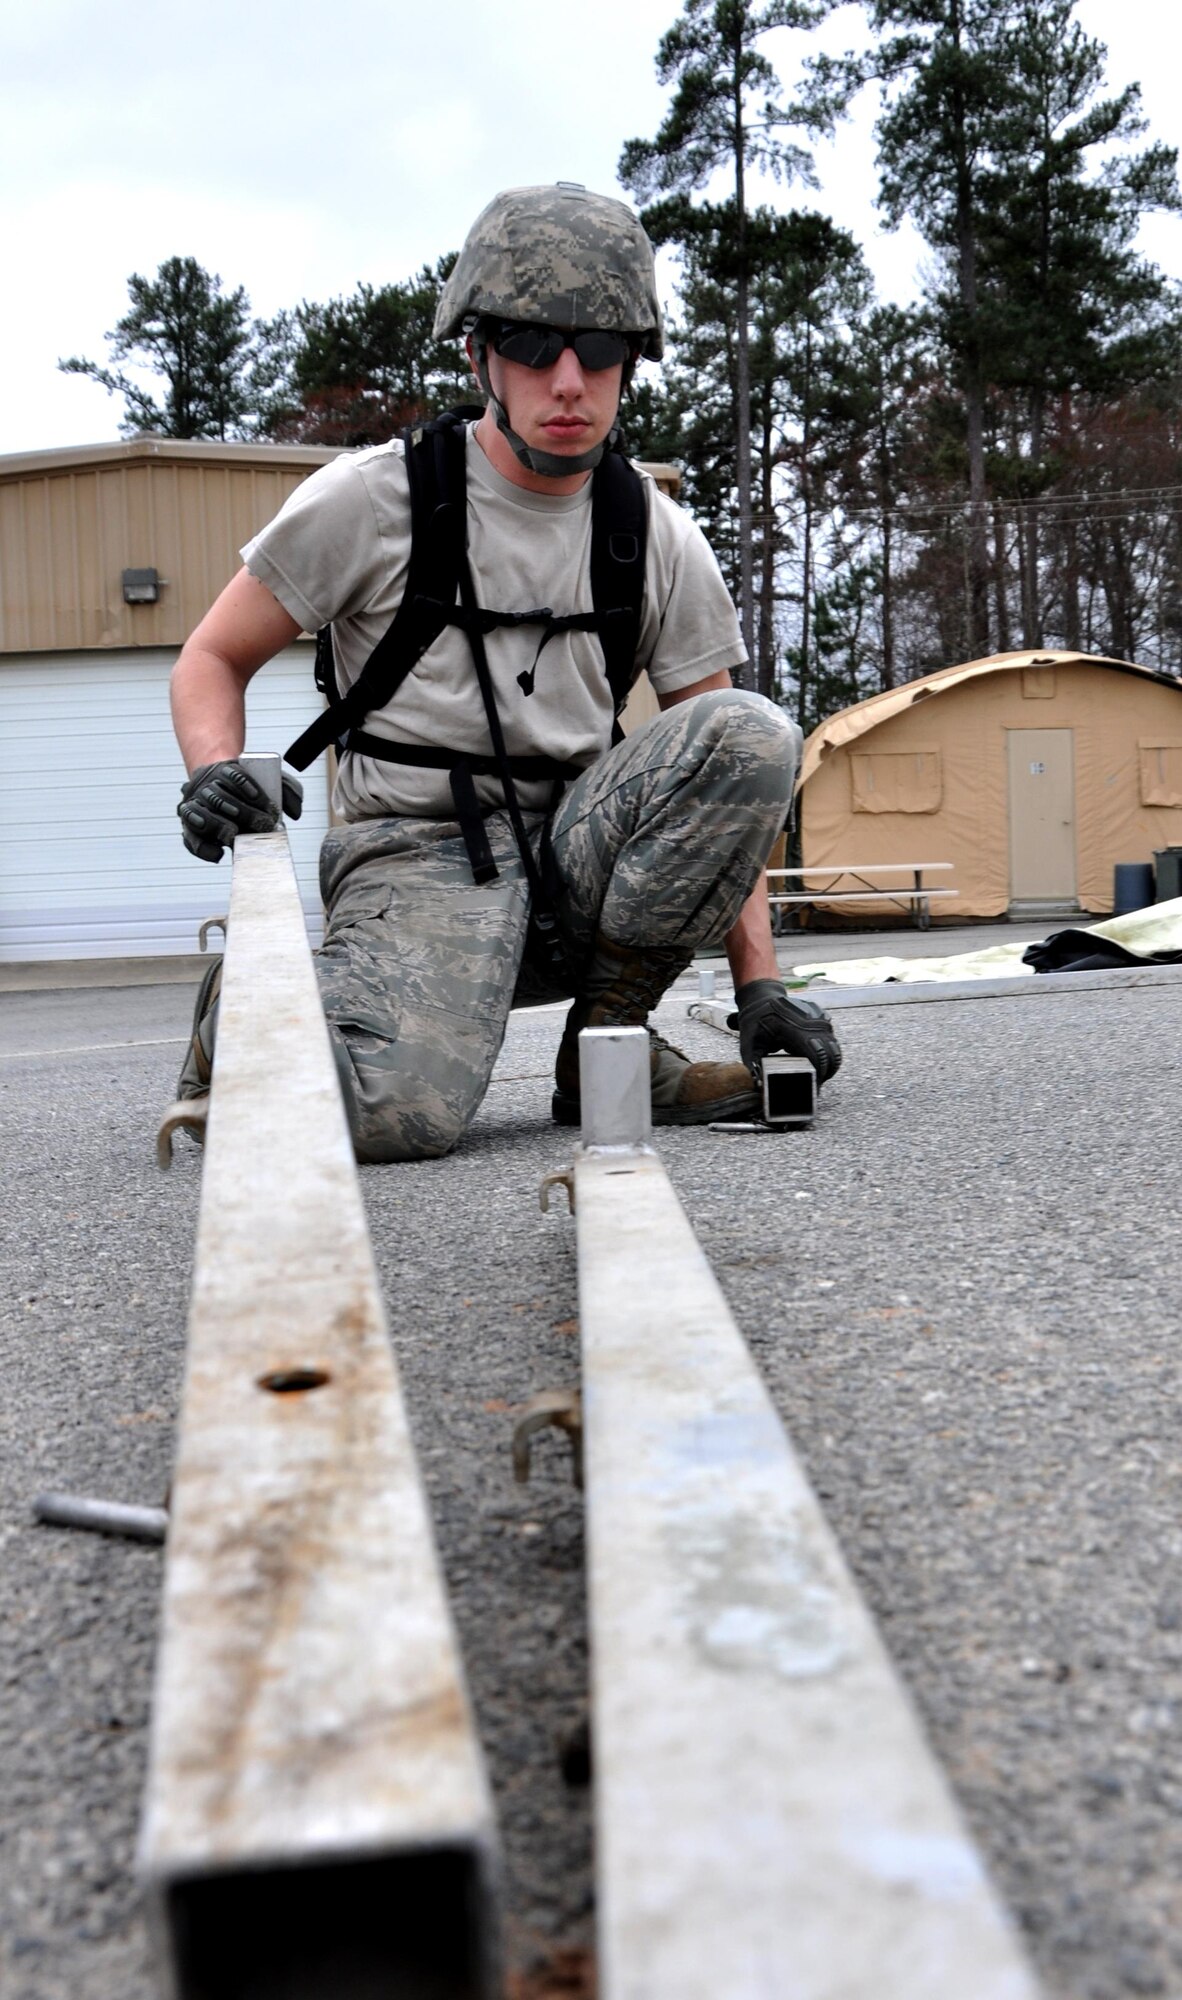 Staff Sgt. Daniel Chrest and Master Sgt. Mark Ansani, 911th Force Support Squadron, Pittsburgh, Pa., plot out their route on a map during OPERATION Everybody Panic as part of Force Support Silver Flag at Dobbins Air Reserve Base, Ga., March 10, 2015. Teams were tasked with engaging targets, self-aid buddy care, providing care under fire, identifying unexploded ordnances and improvised explosive devices, describing and providing the location of the UXOs and IEDs on a grid, low and high crawling, and transporting remains during this scenario.  (U.S. Air Force photo/Senior Airman Daniel Phelps)